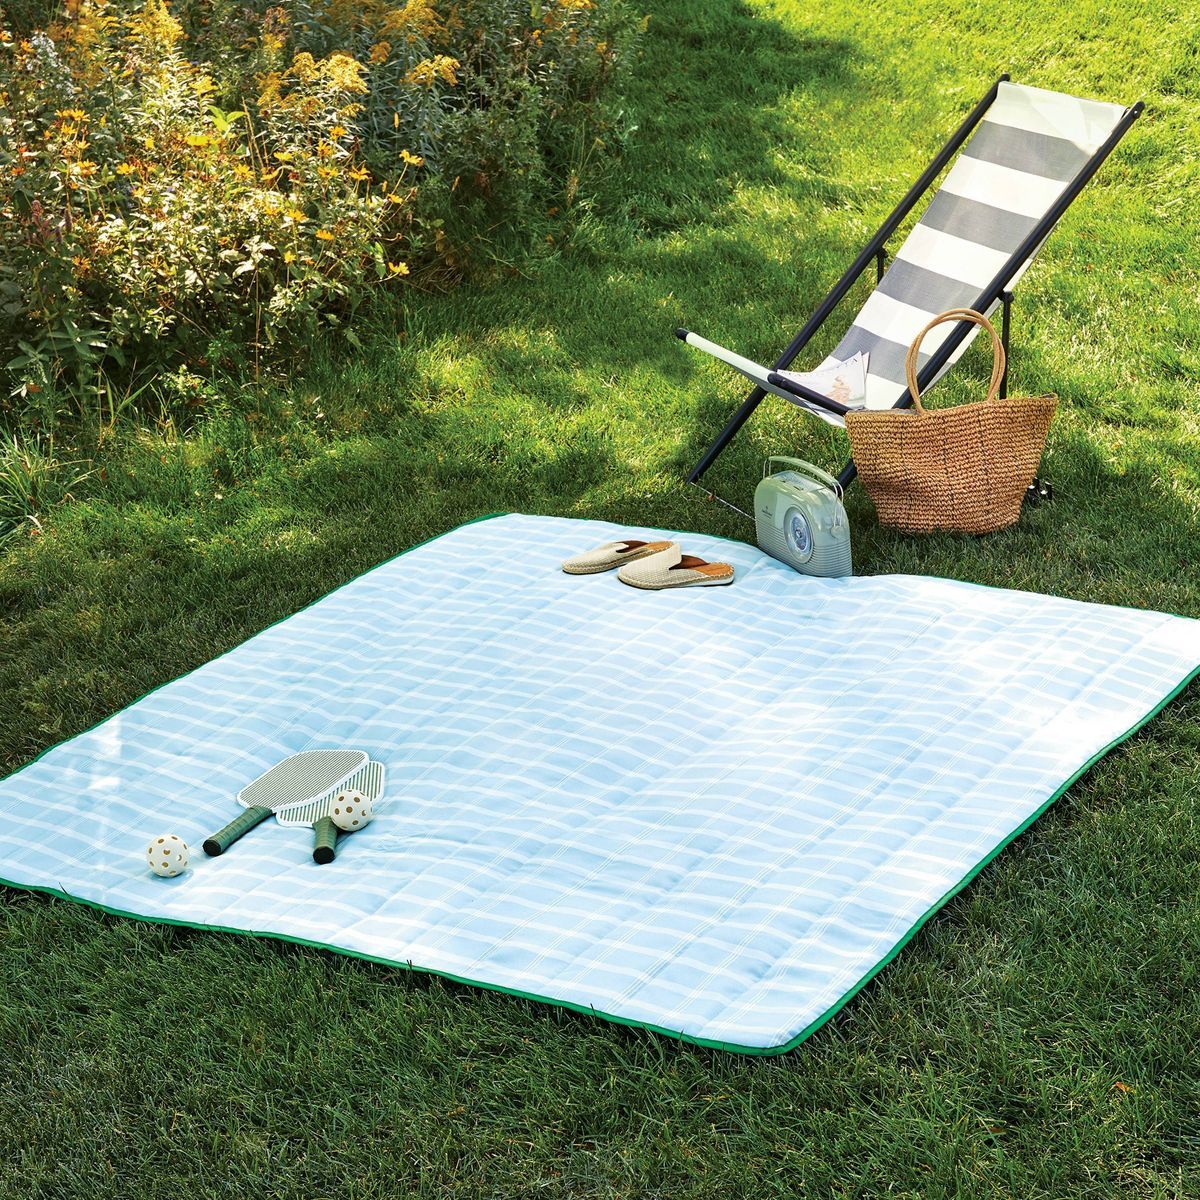 72"x72" Checkered Plaid Picnic Blanket Cream/Light Blue/Green - Hearth & Hand™ with Magnolia | Target